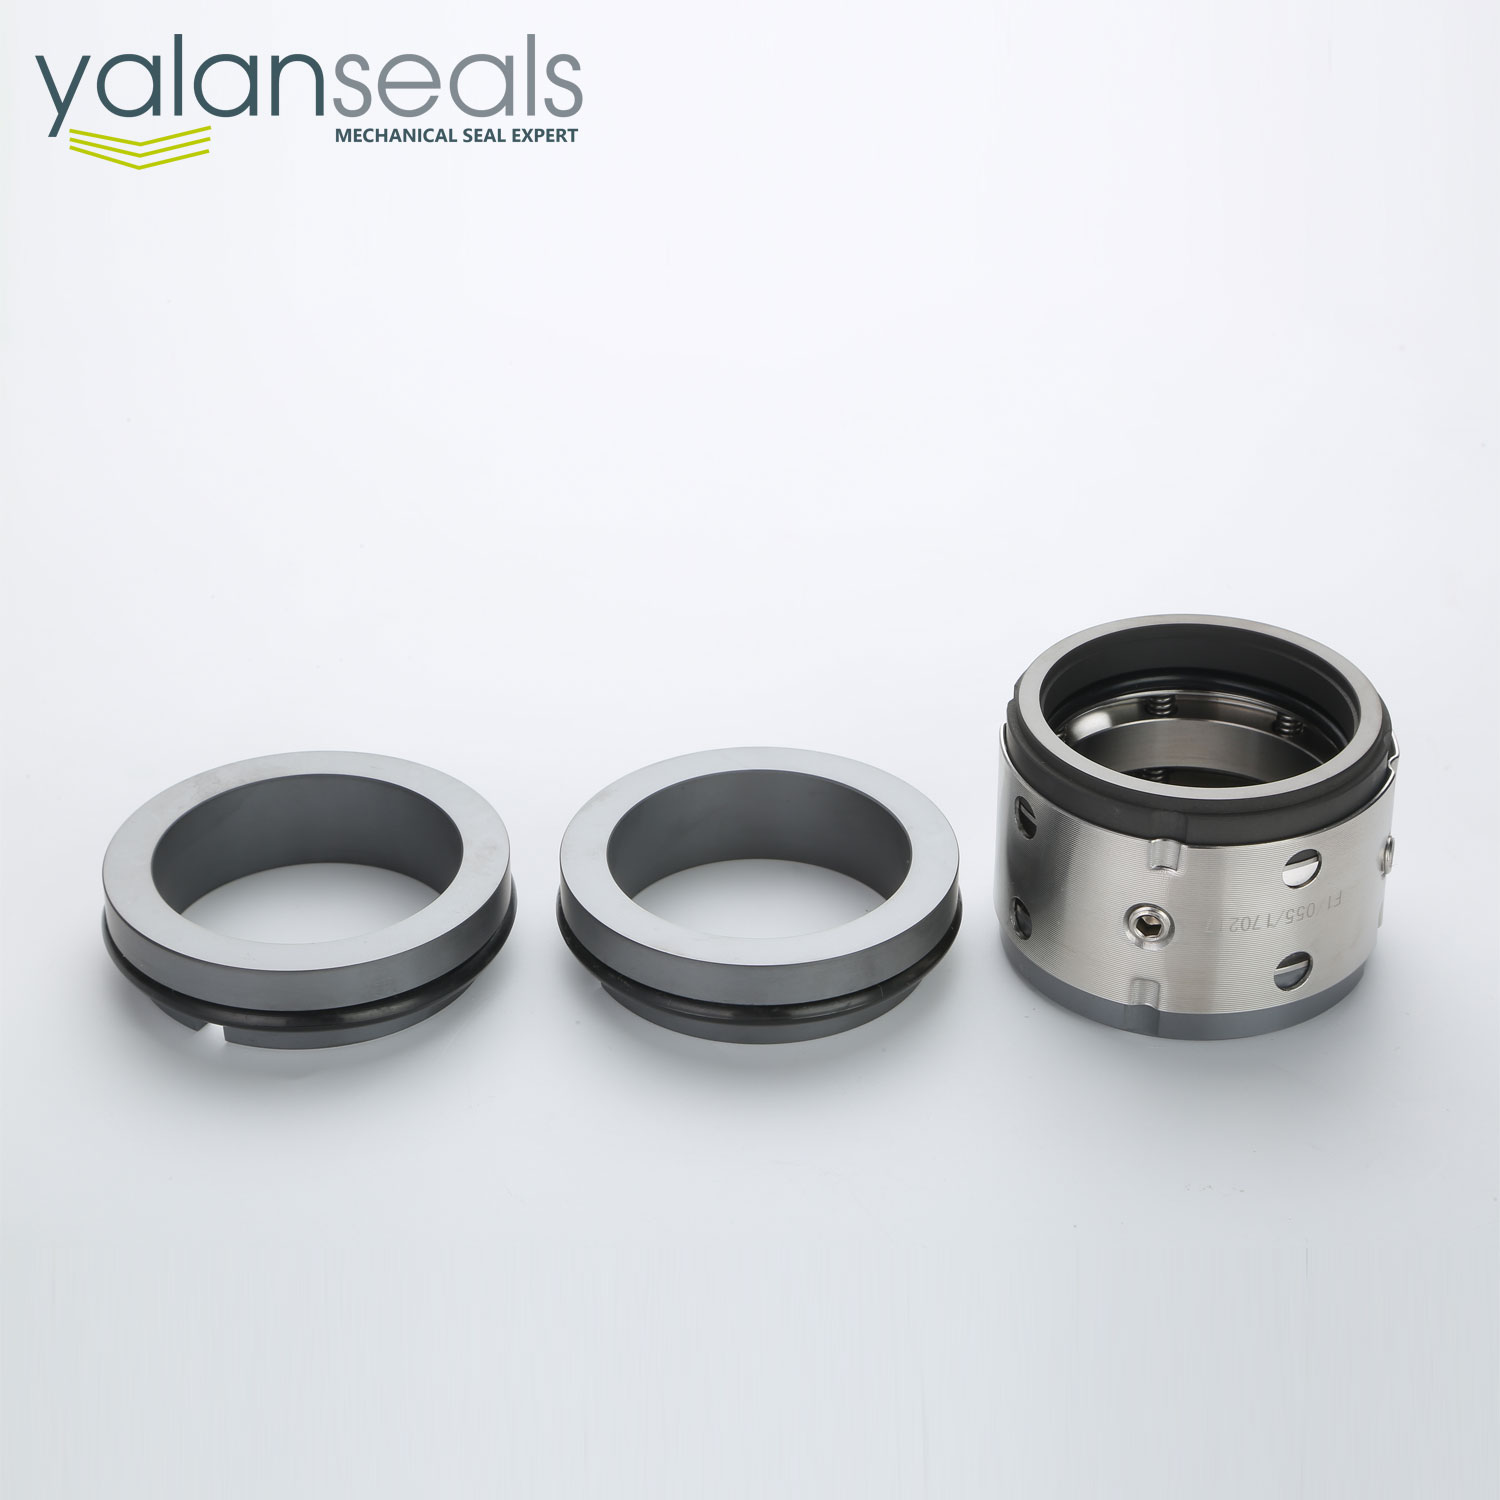 YALAN M74R-D Double End Mechanical Seals for Chemical Centrifugal Pumps, KSB/Kaiquan Water Pumps and Double Suction Pumps, Design Improved from Traditional M74-D Seals